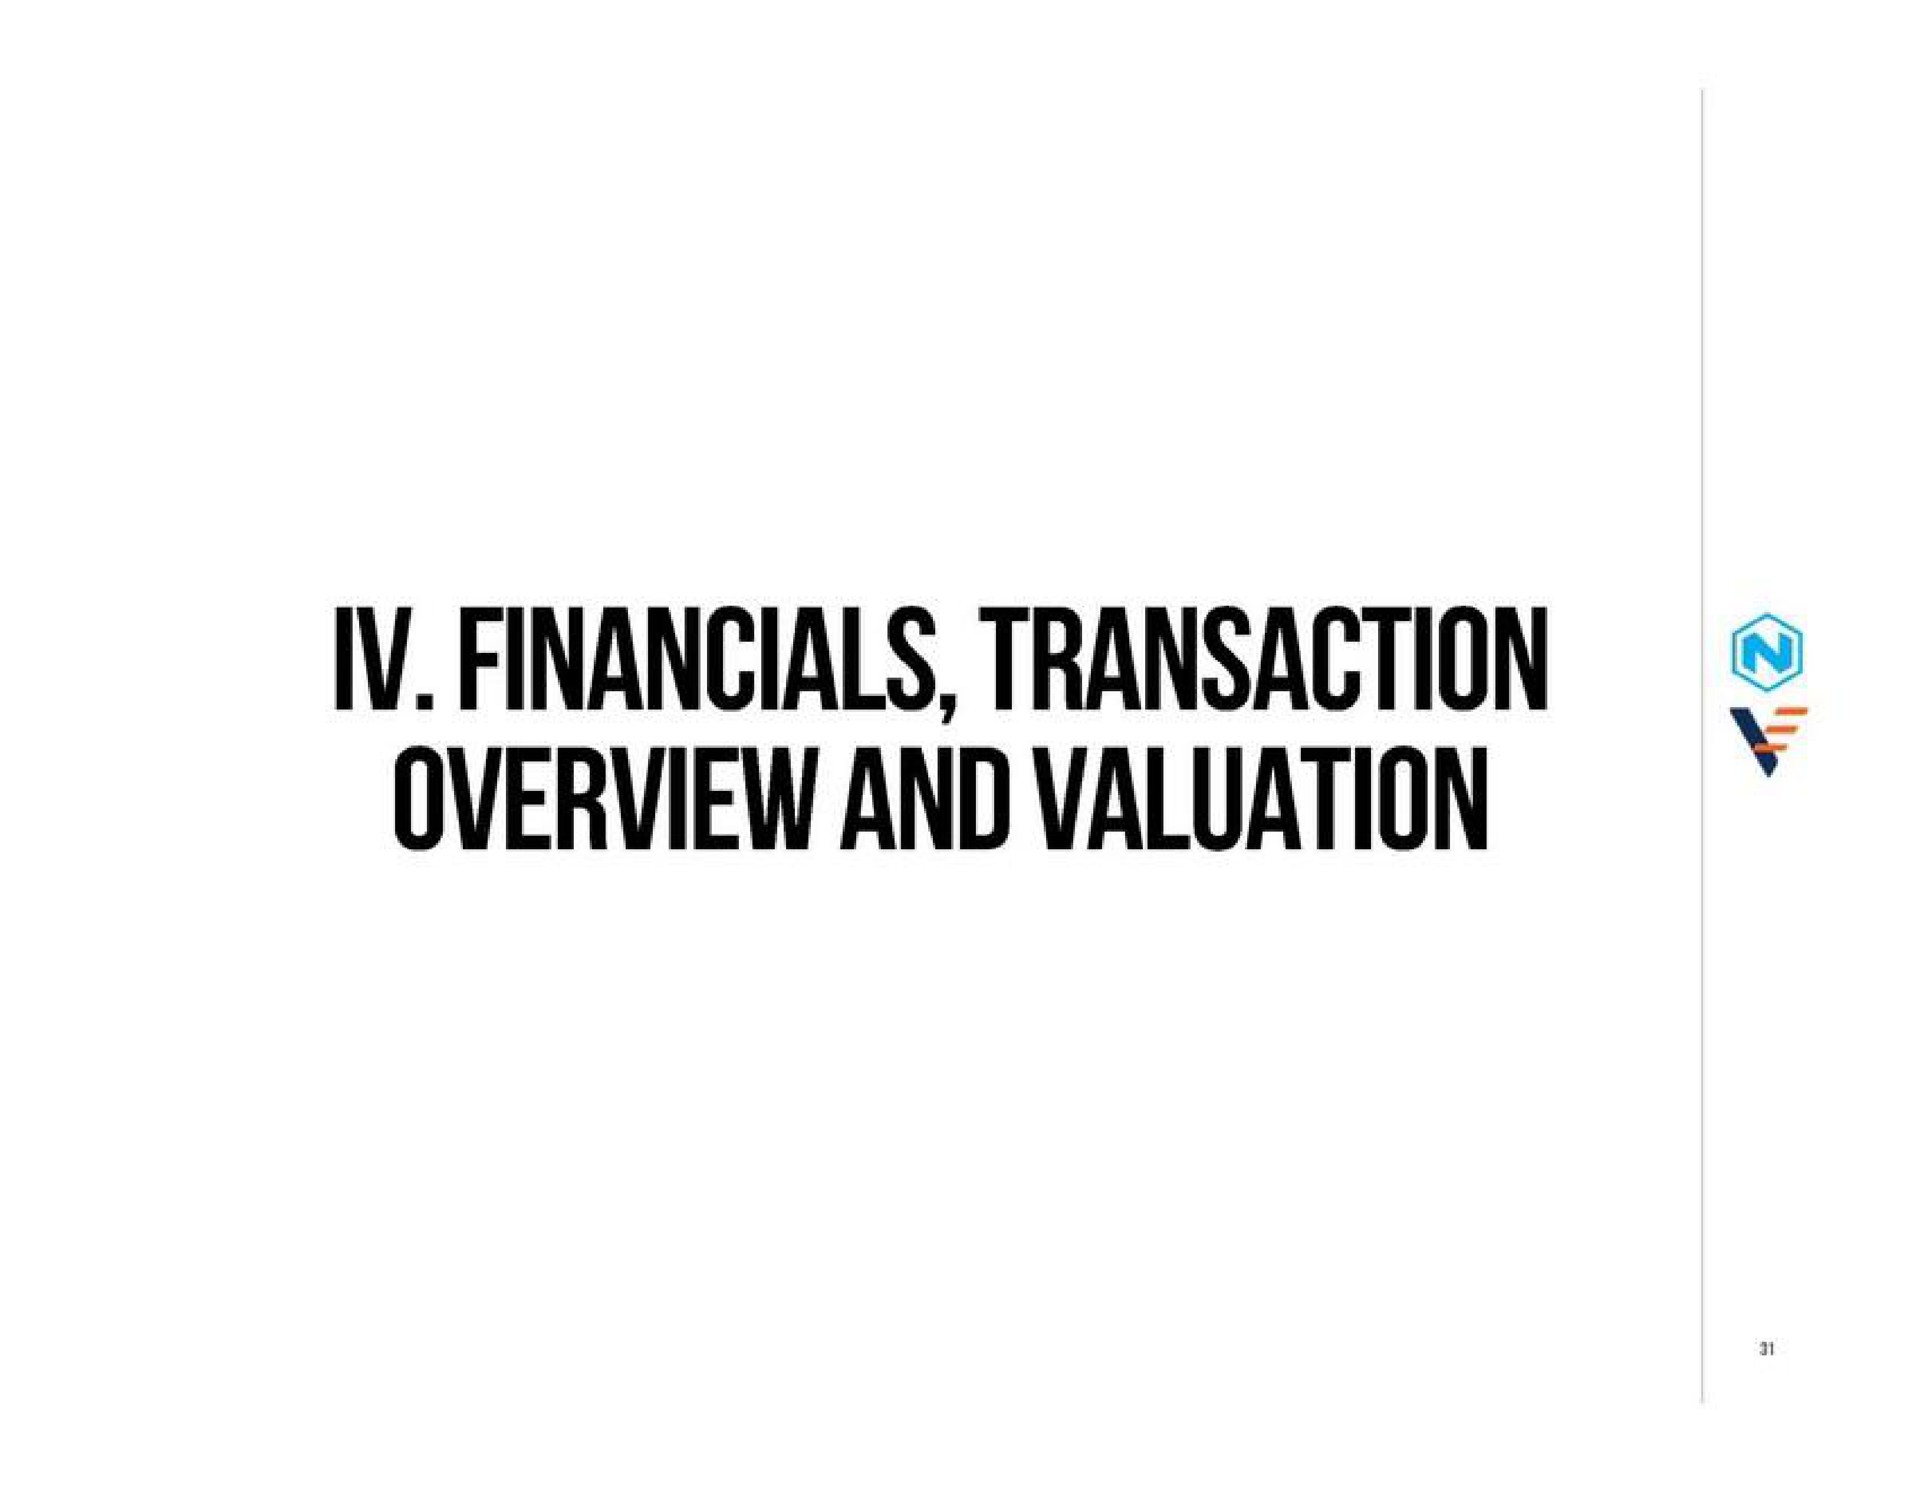 transaction overview and valuation | Nikola